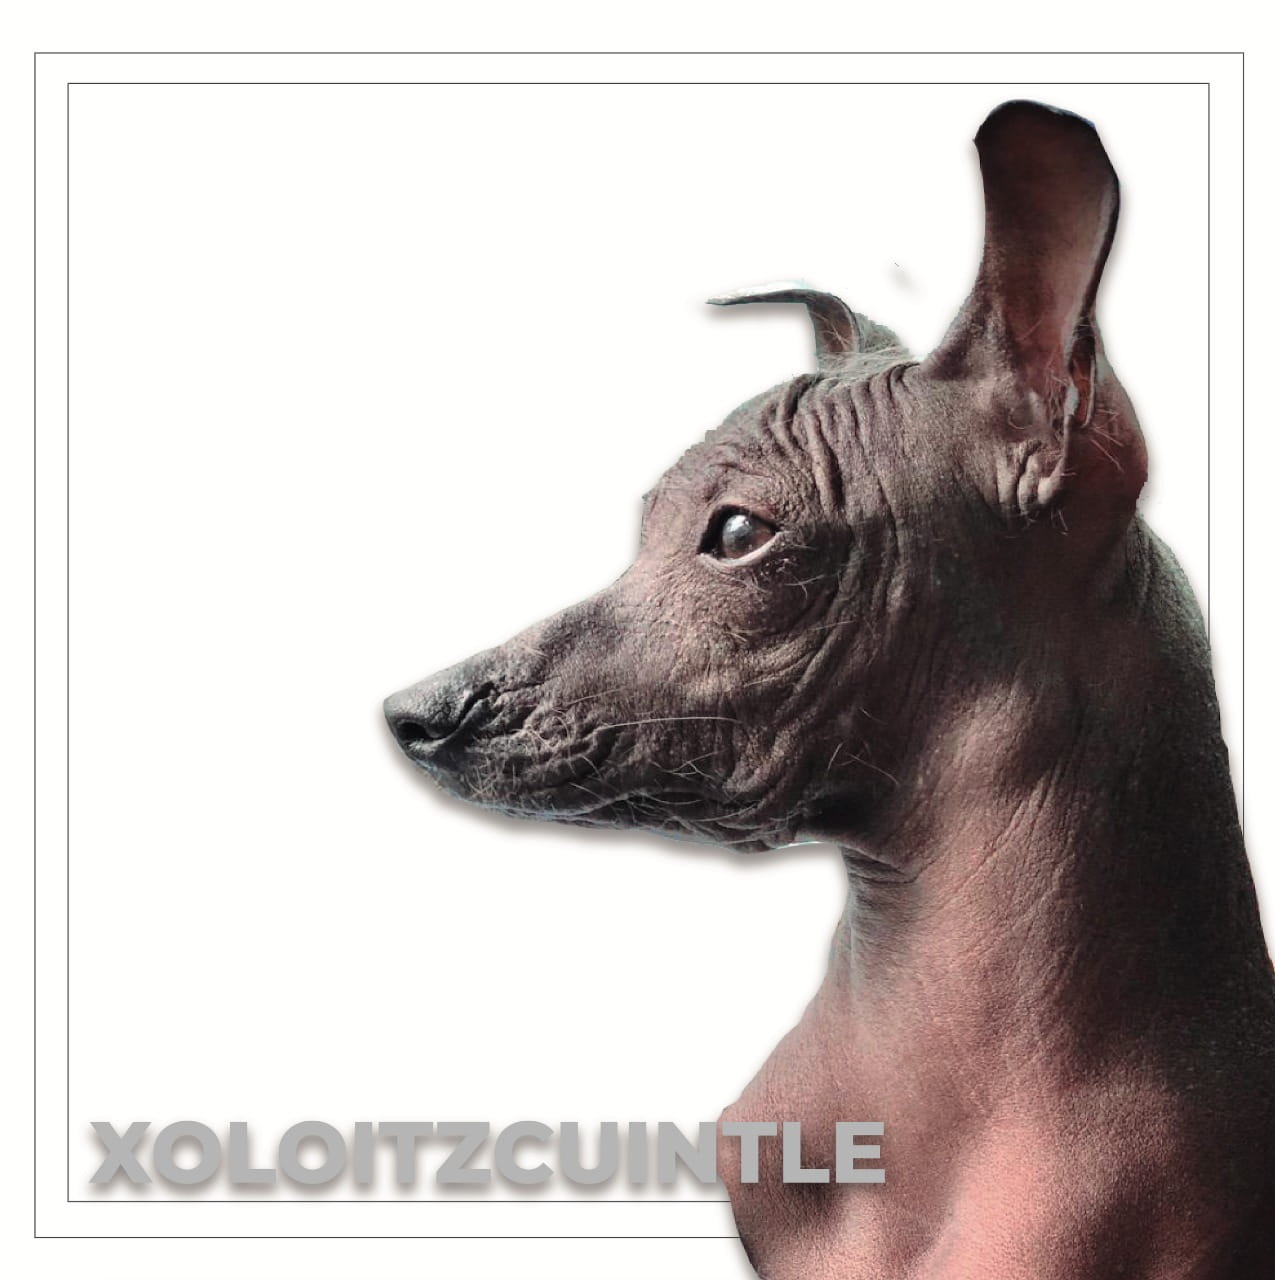 This is the legend of the Xoloitzcuintle, the Aztec dog